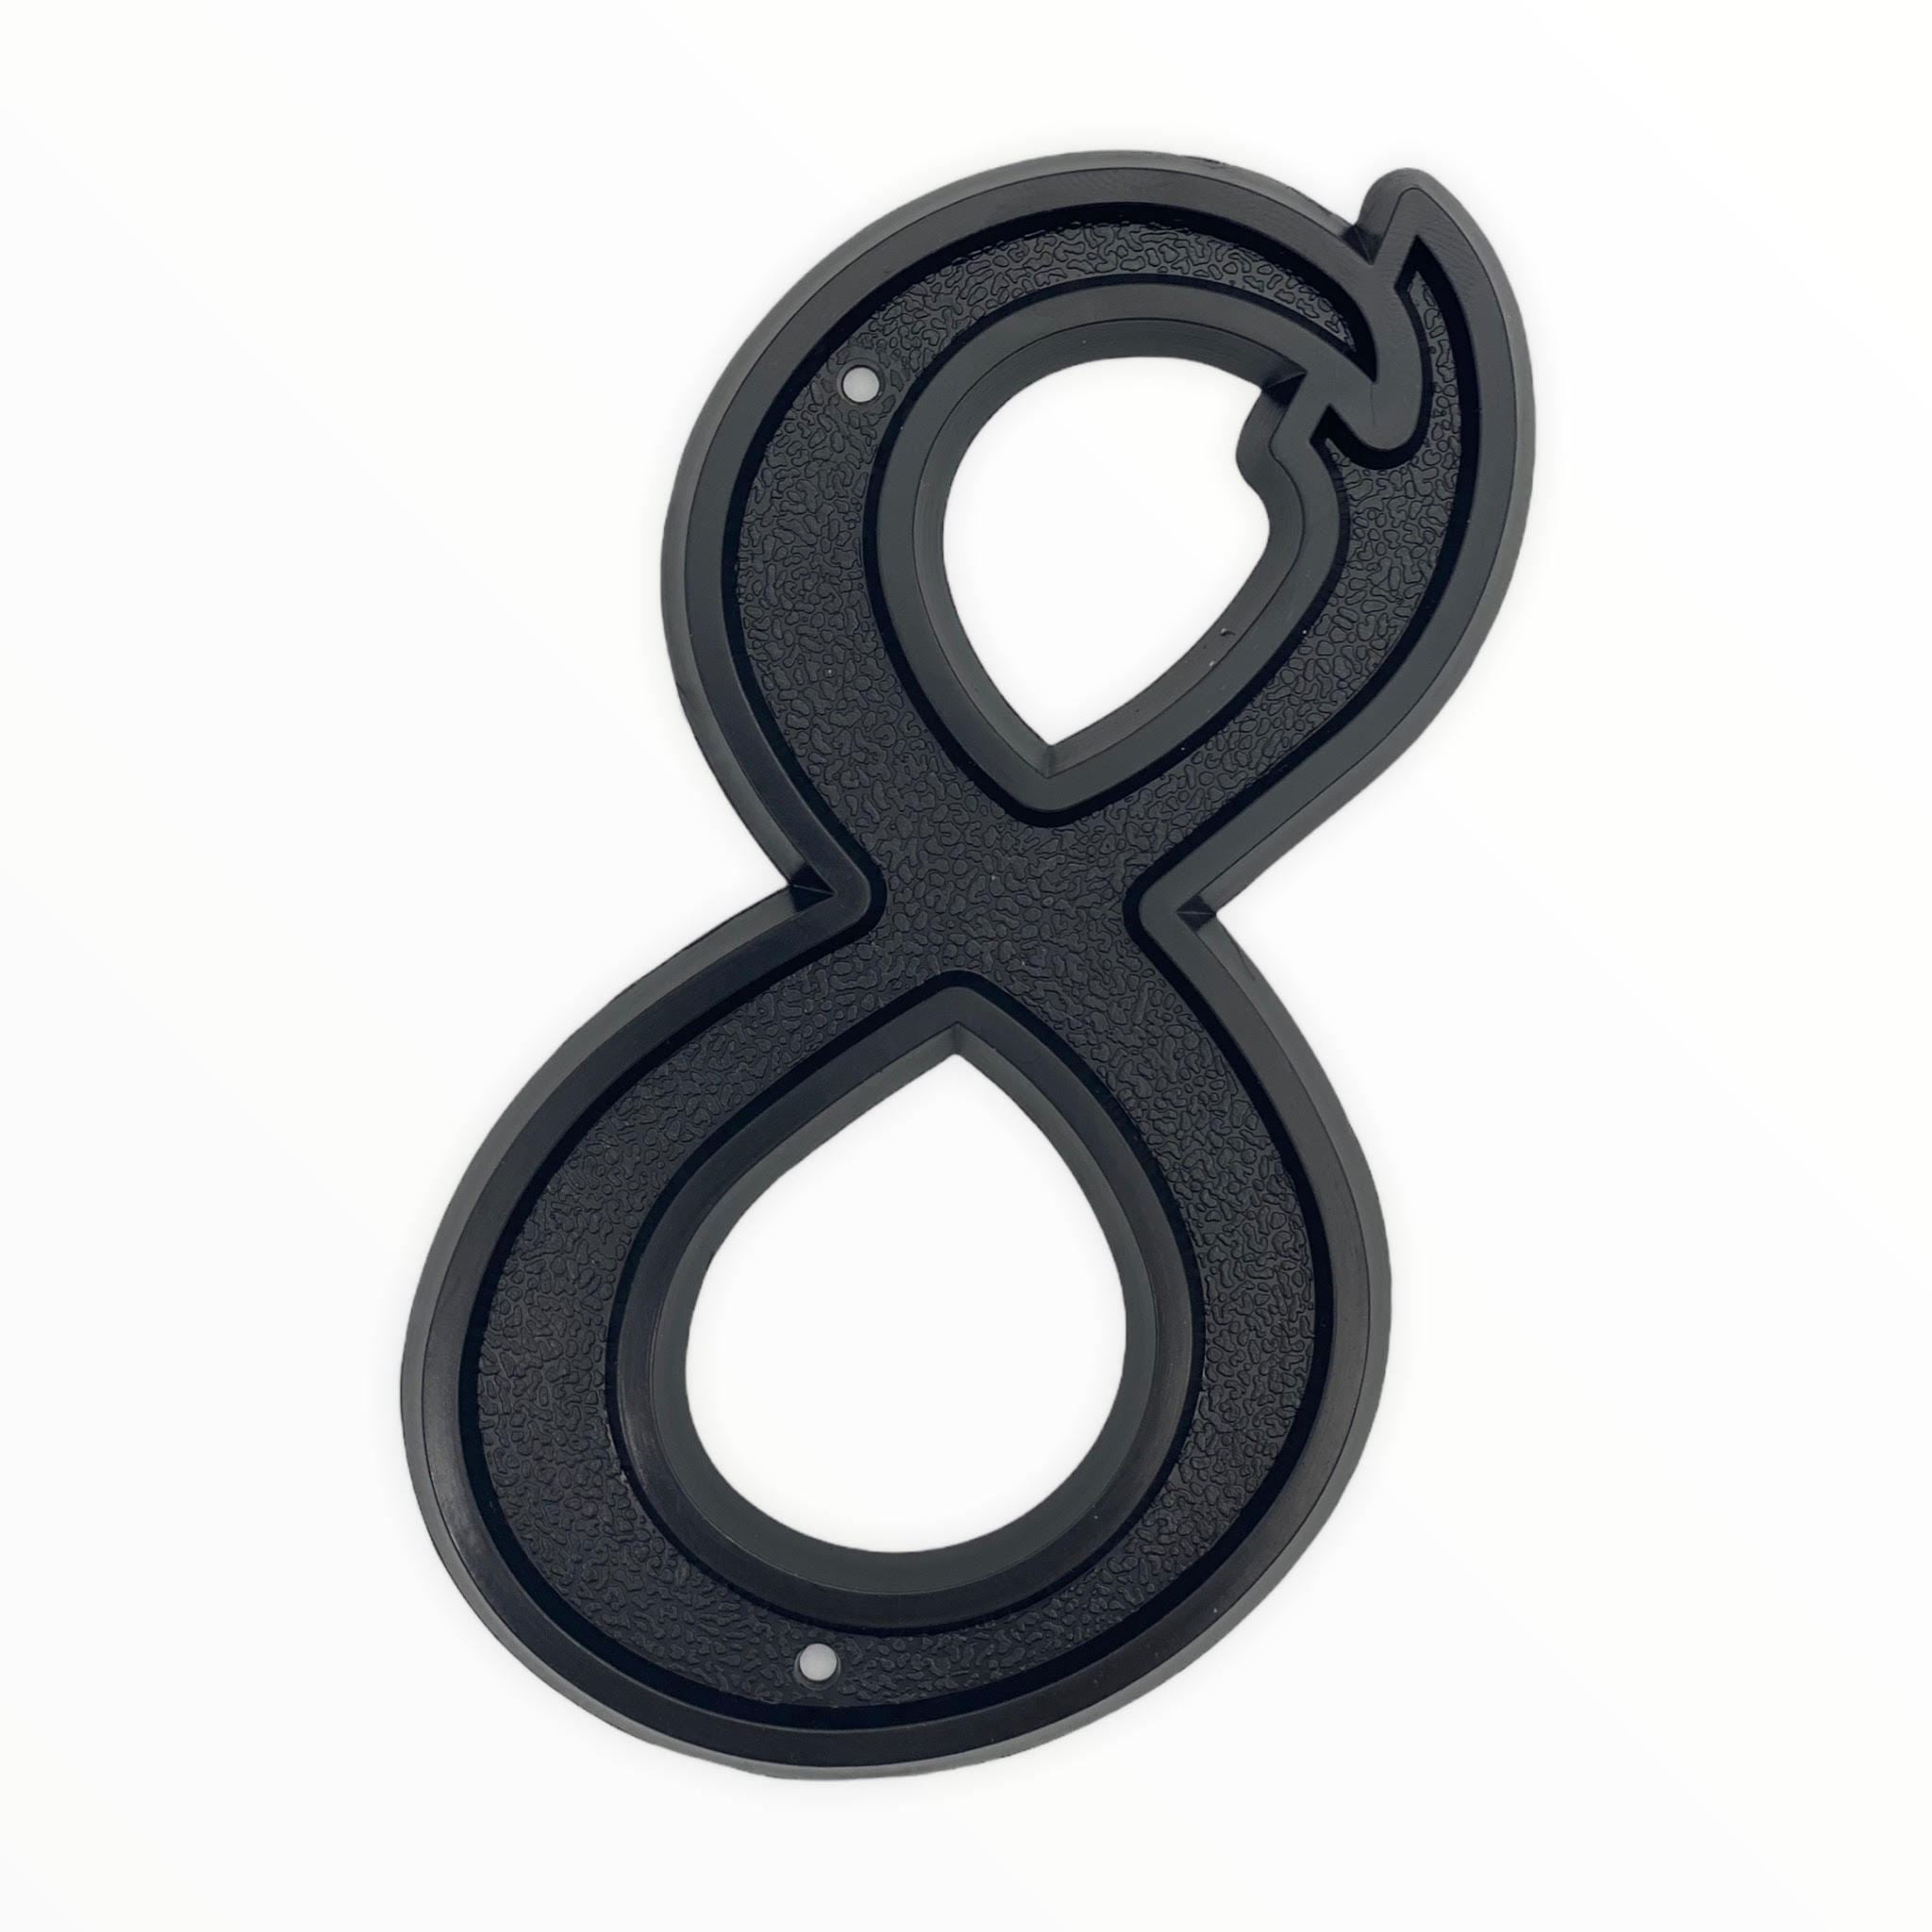 4 Rustic Dark Solid Bronze Metal House Numbers 4 INCH PICK YOUR NUMBER